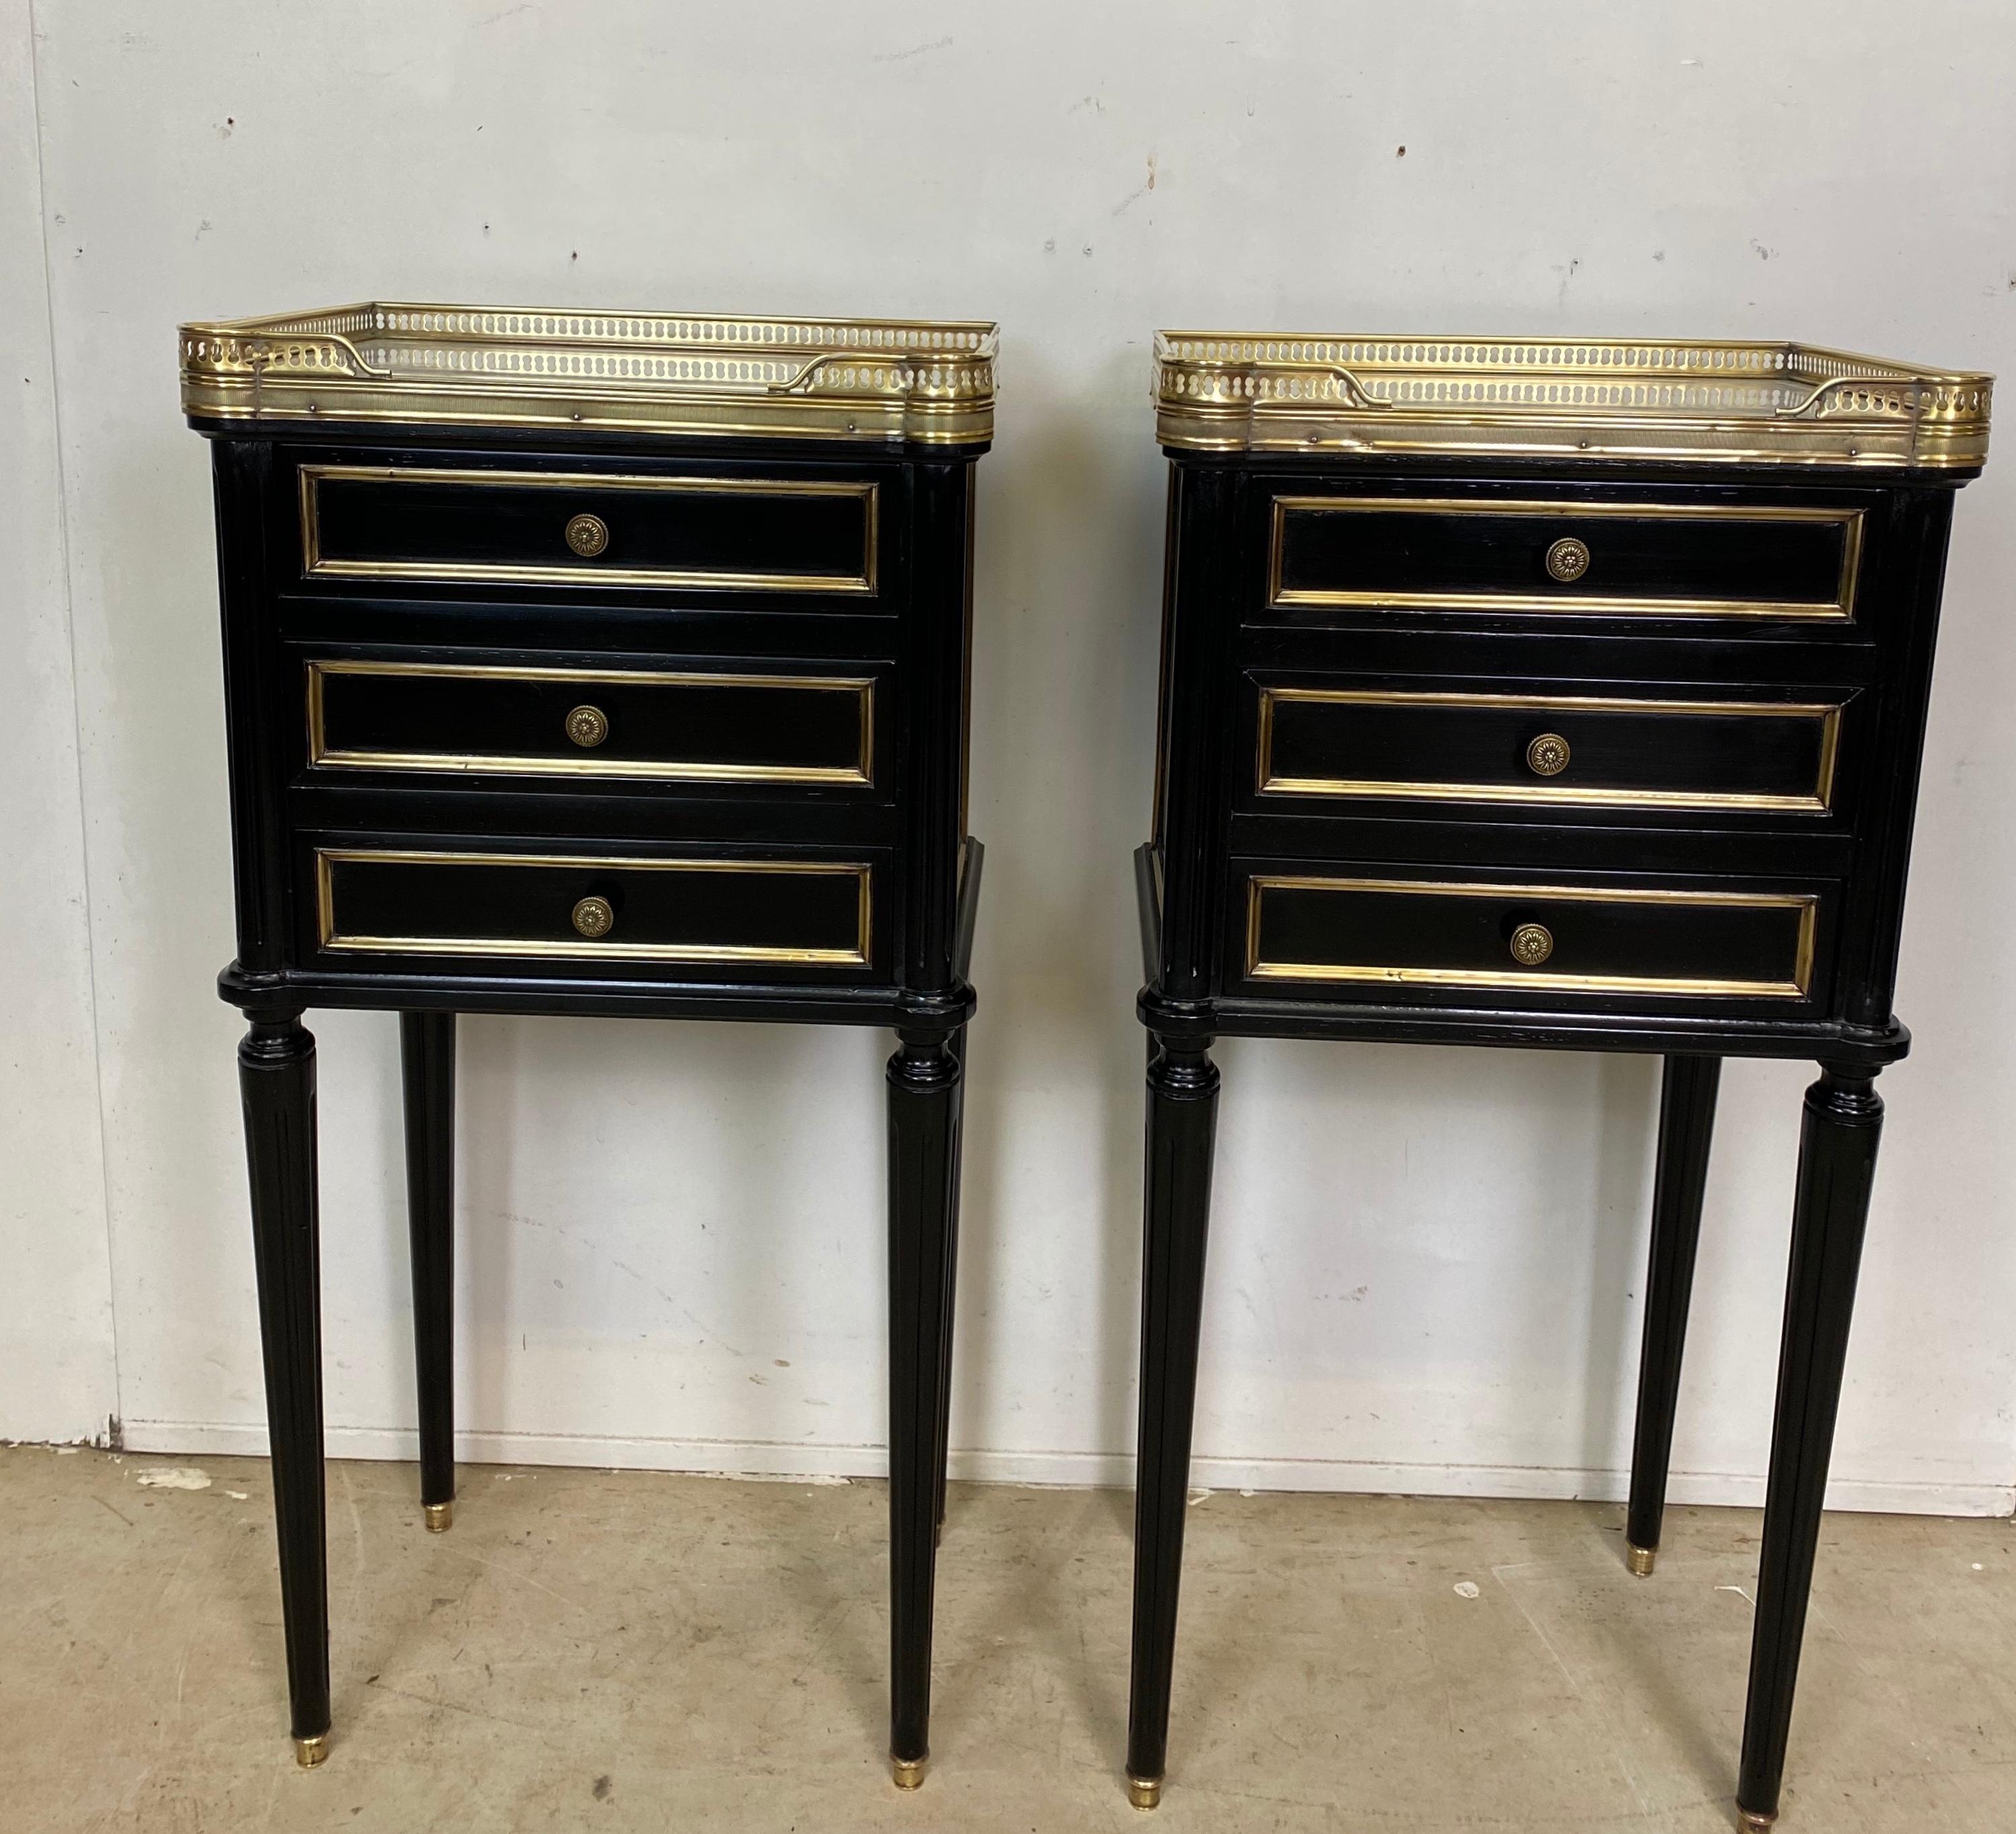 A nicely proportioned pair of French Empire ebonized nightstands. All in excellent condition.